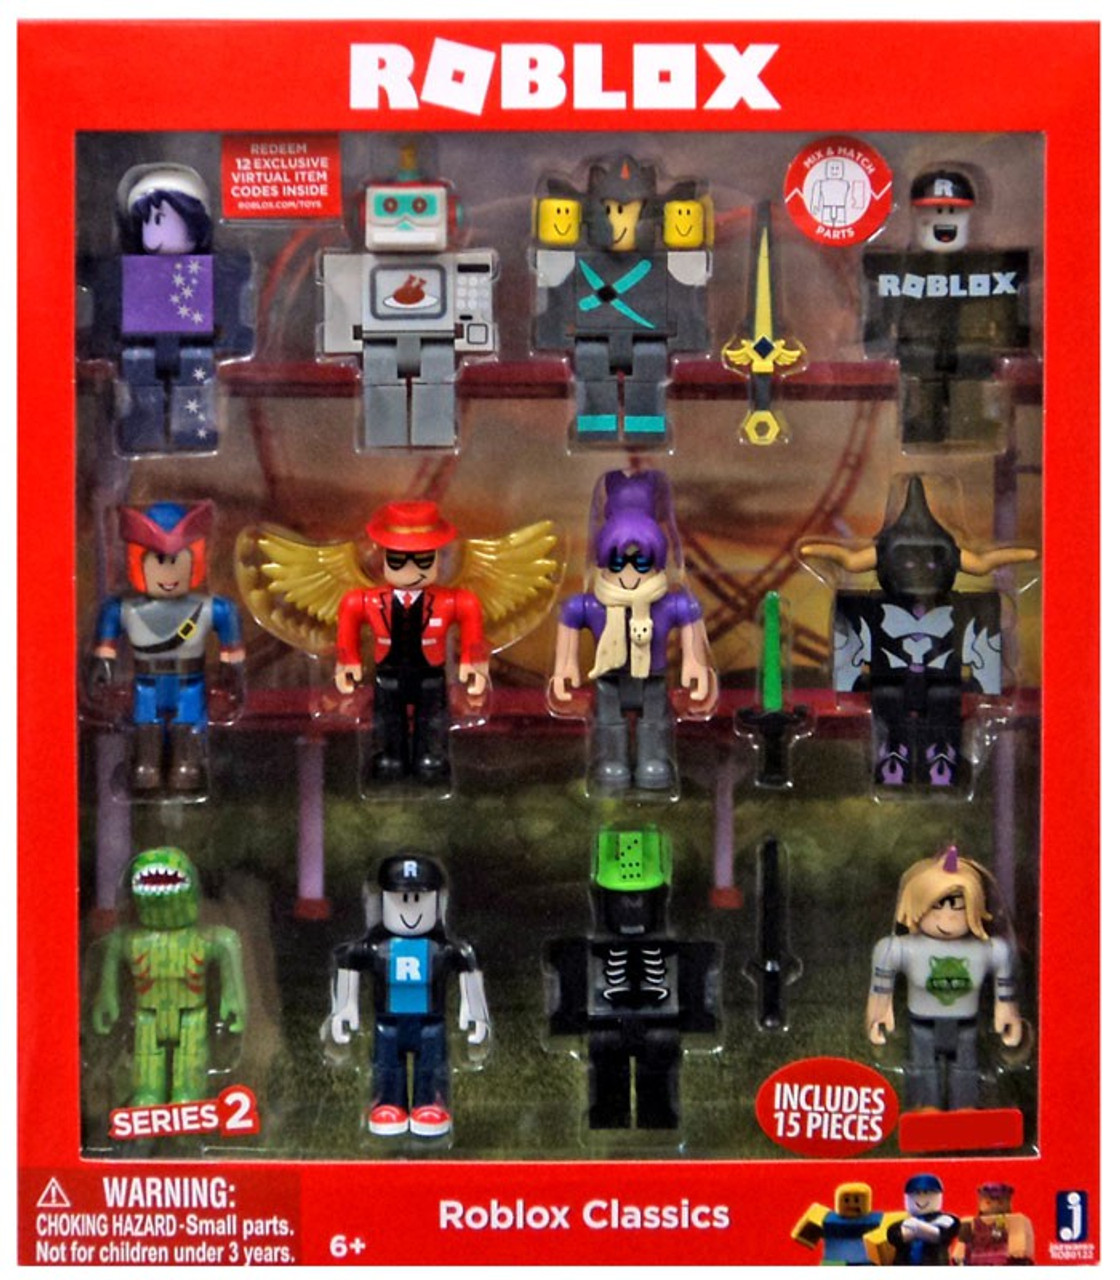 Roblox Series 2 Roblox Classics Exclusive 3 Action Figure 12 Pack